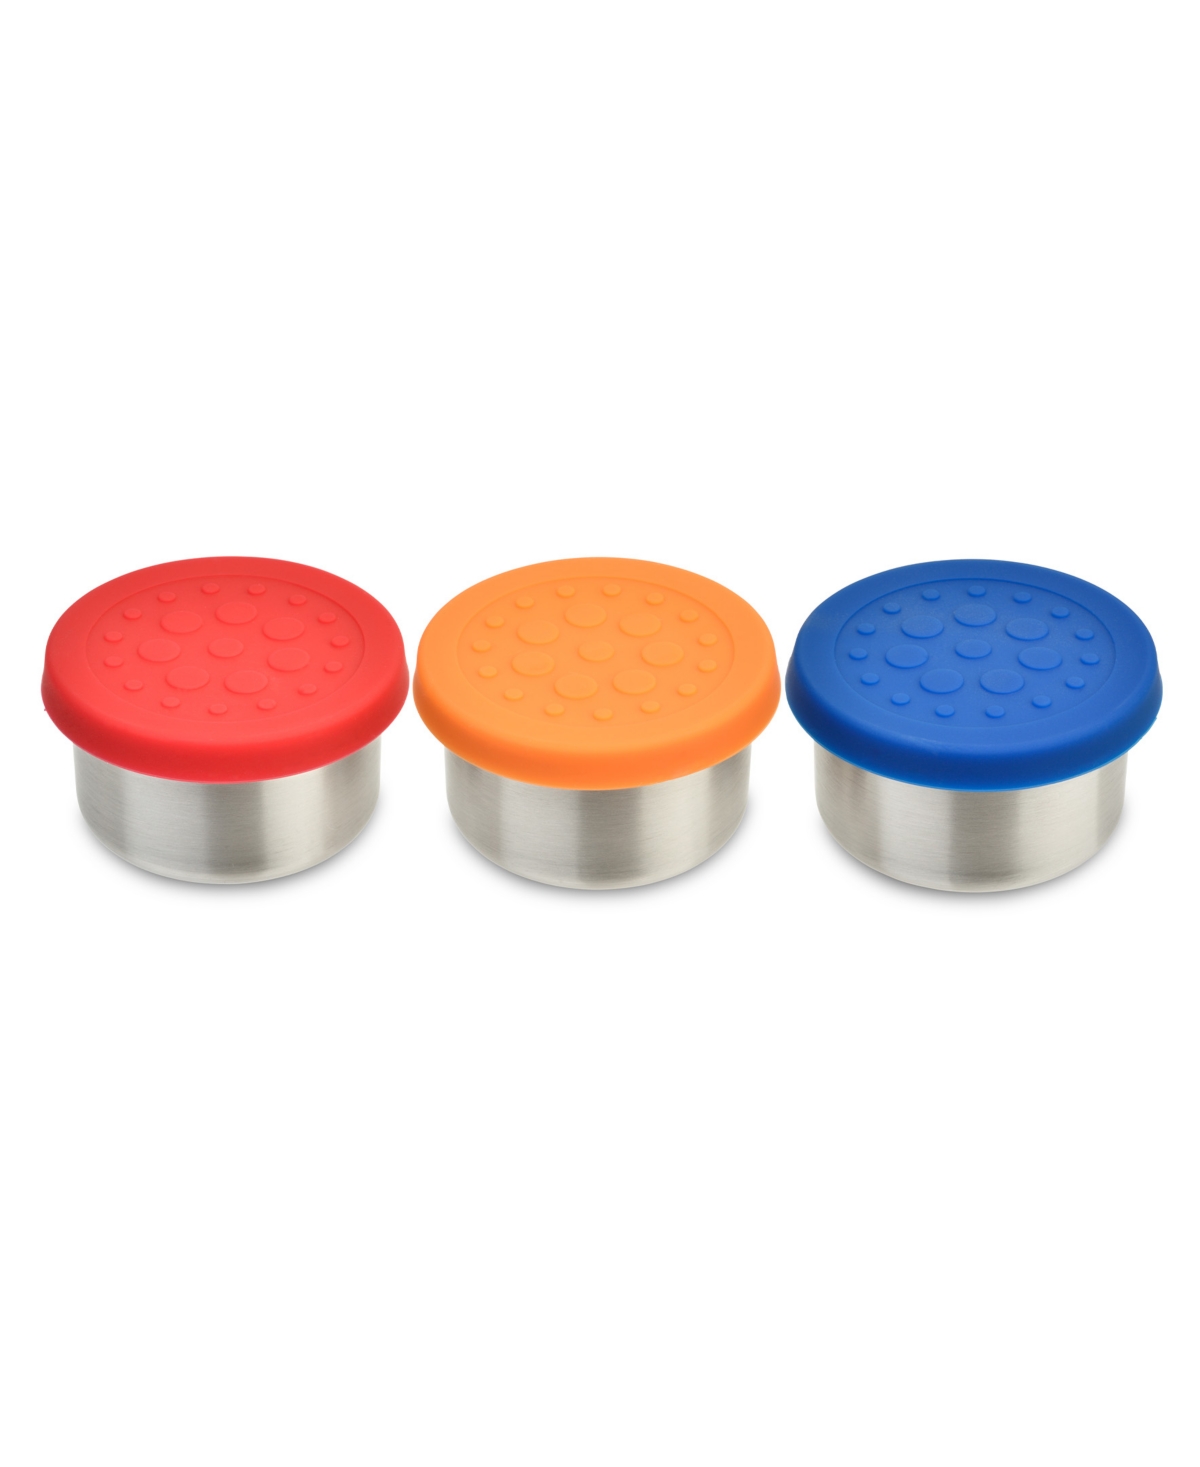 Lunchbots 1.5 oz Dips Stainless Steel Leak-resistant Condiment Holders Assorted Color Silicone Lids, Set Of 3